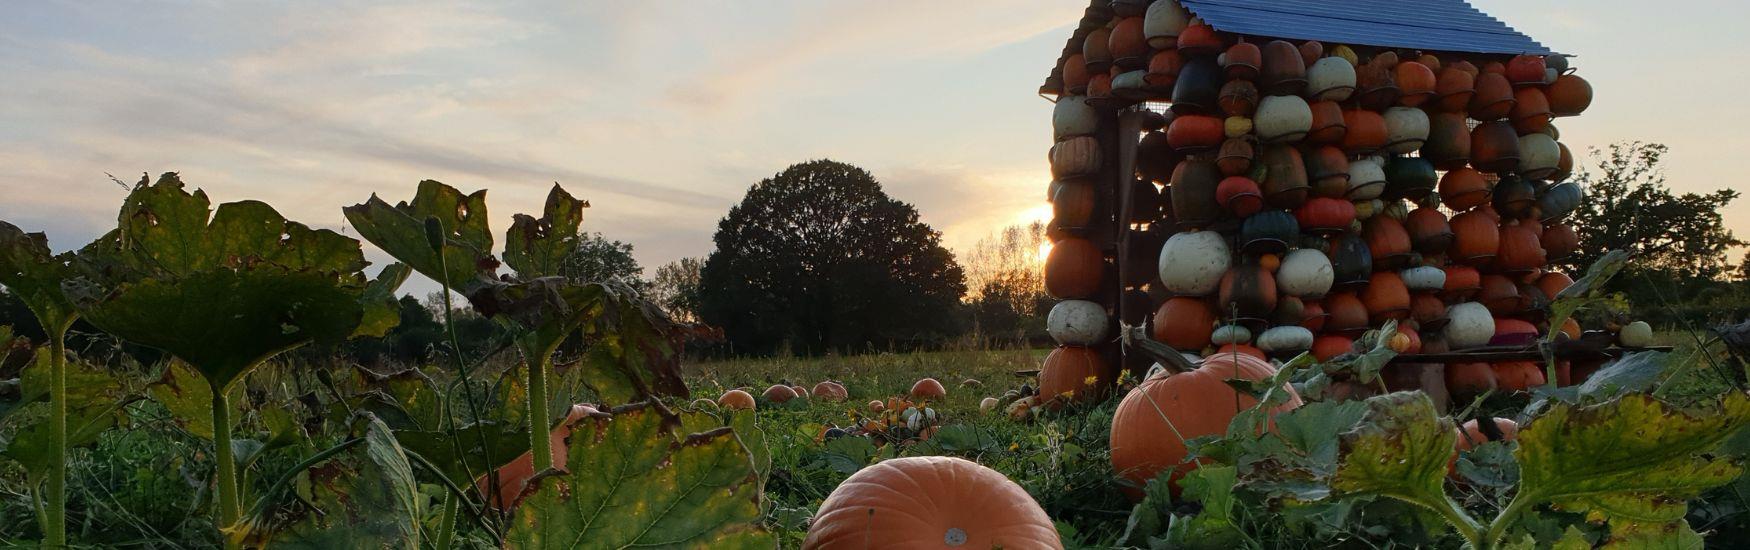 Pumpkins in a field, ready to be picked for Halloween.